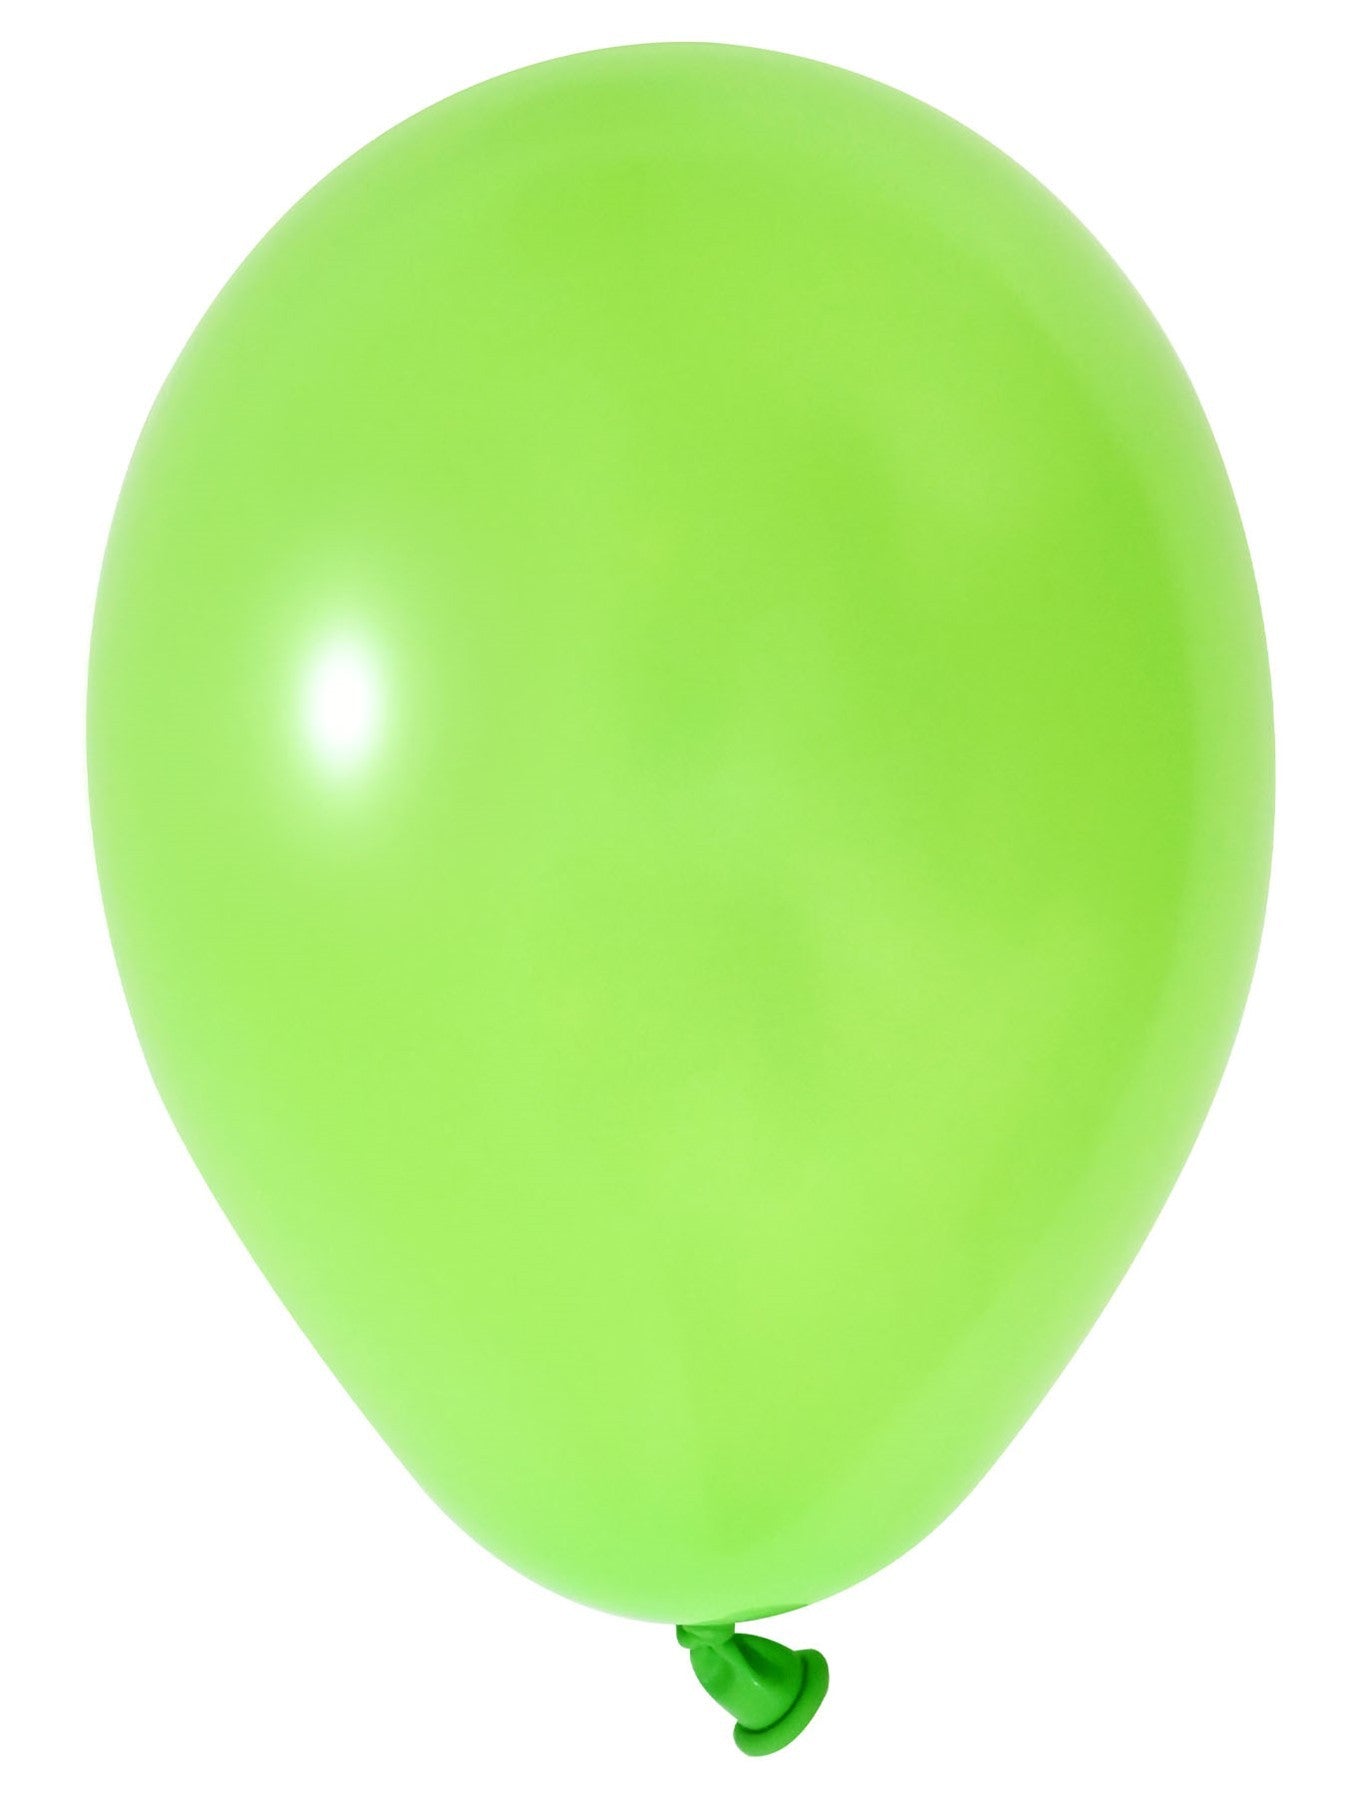 View Light Green Latex Balloon 5inch Pack of 100 information